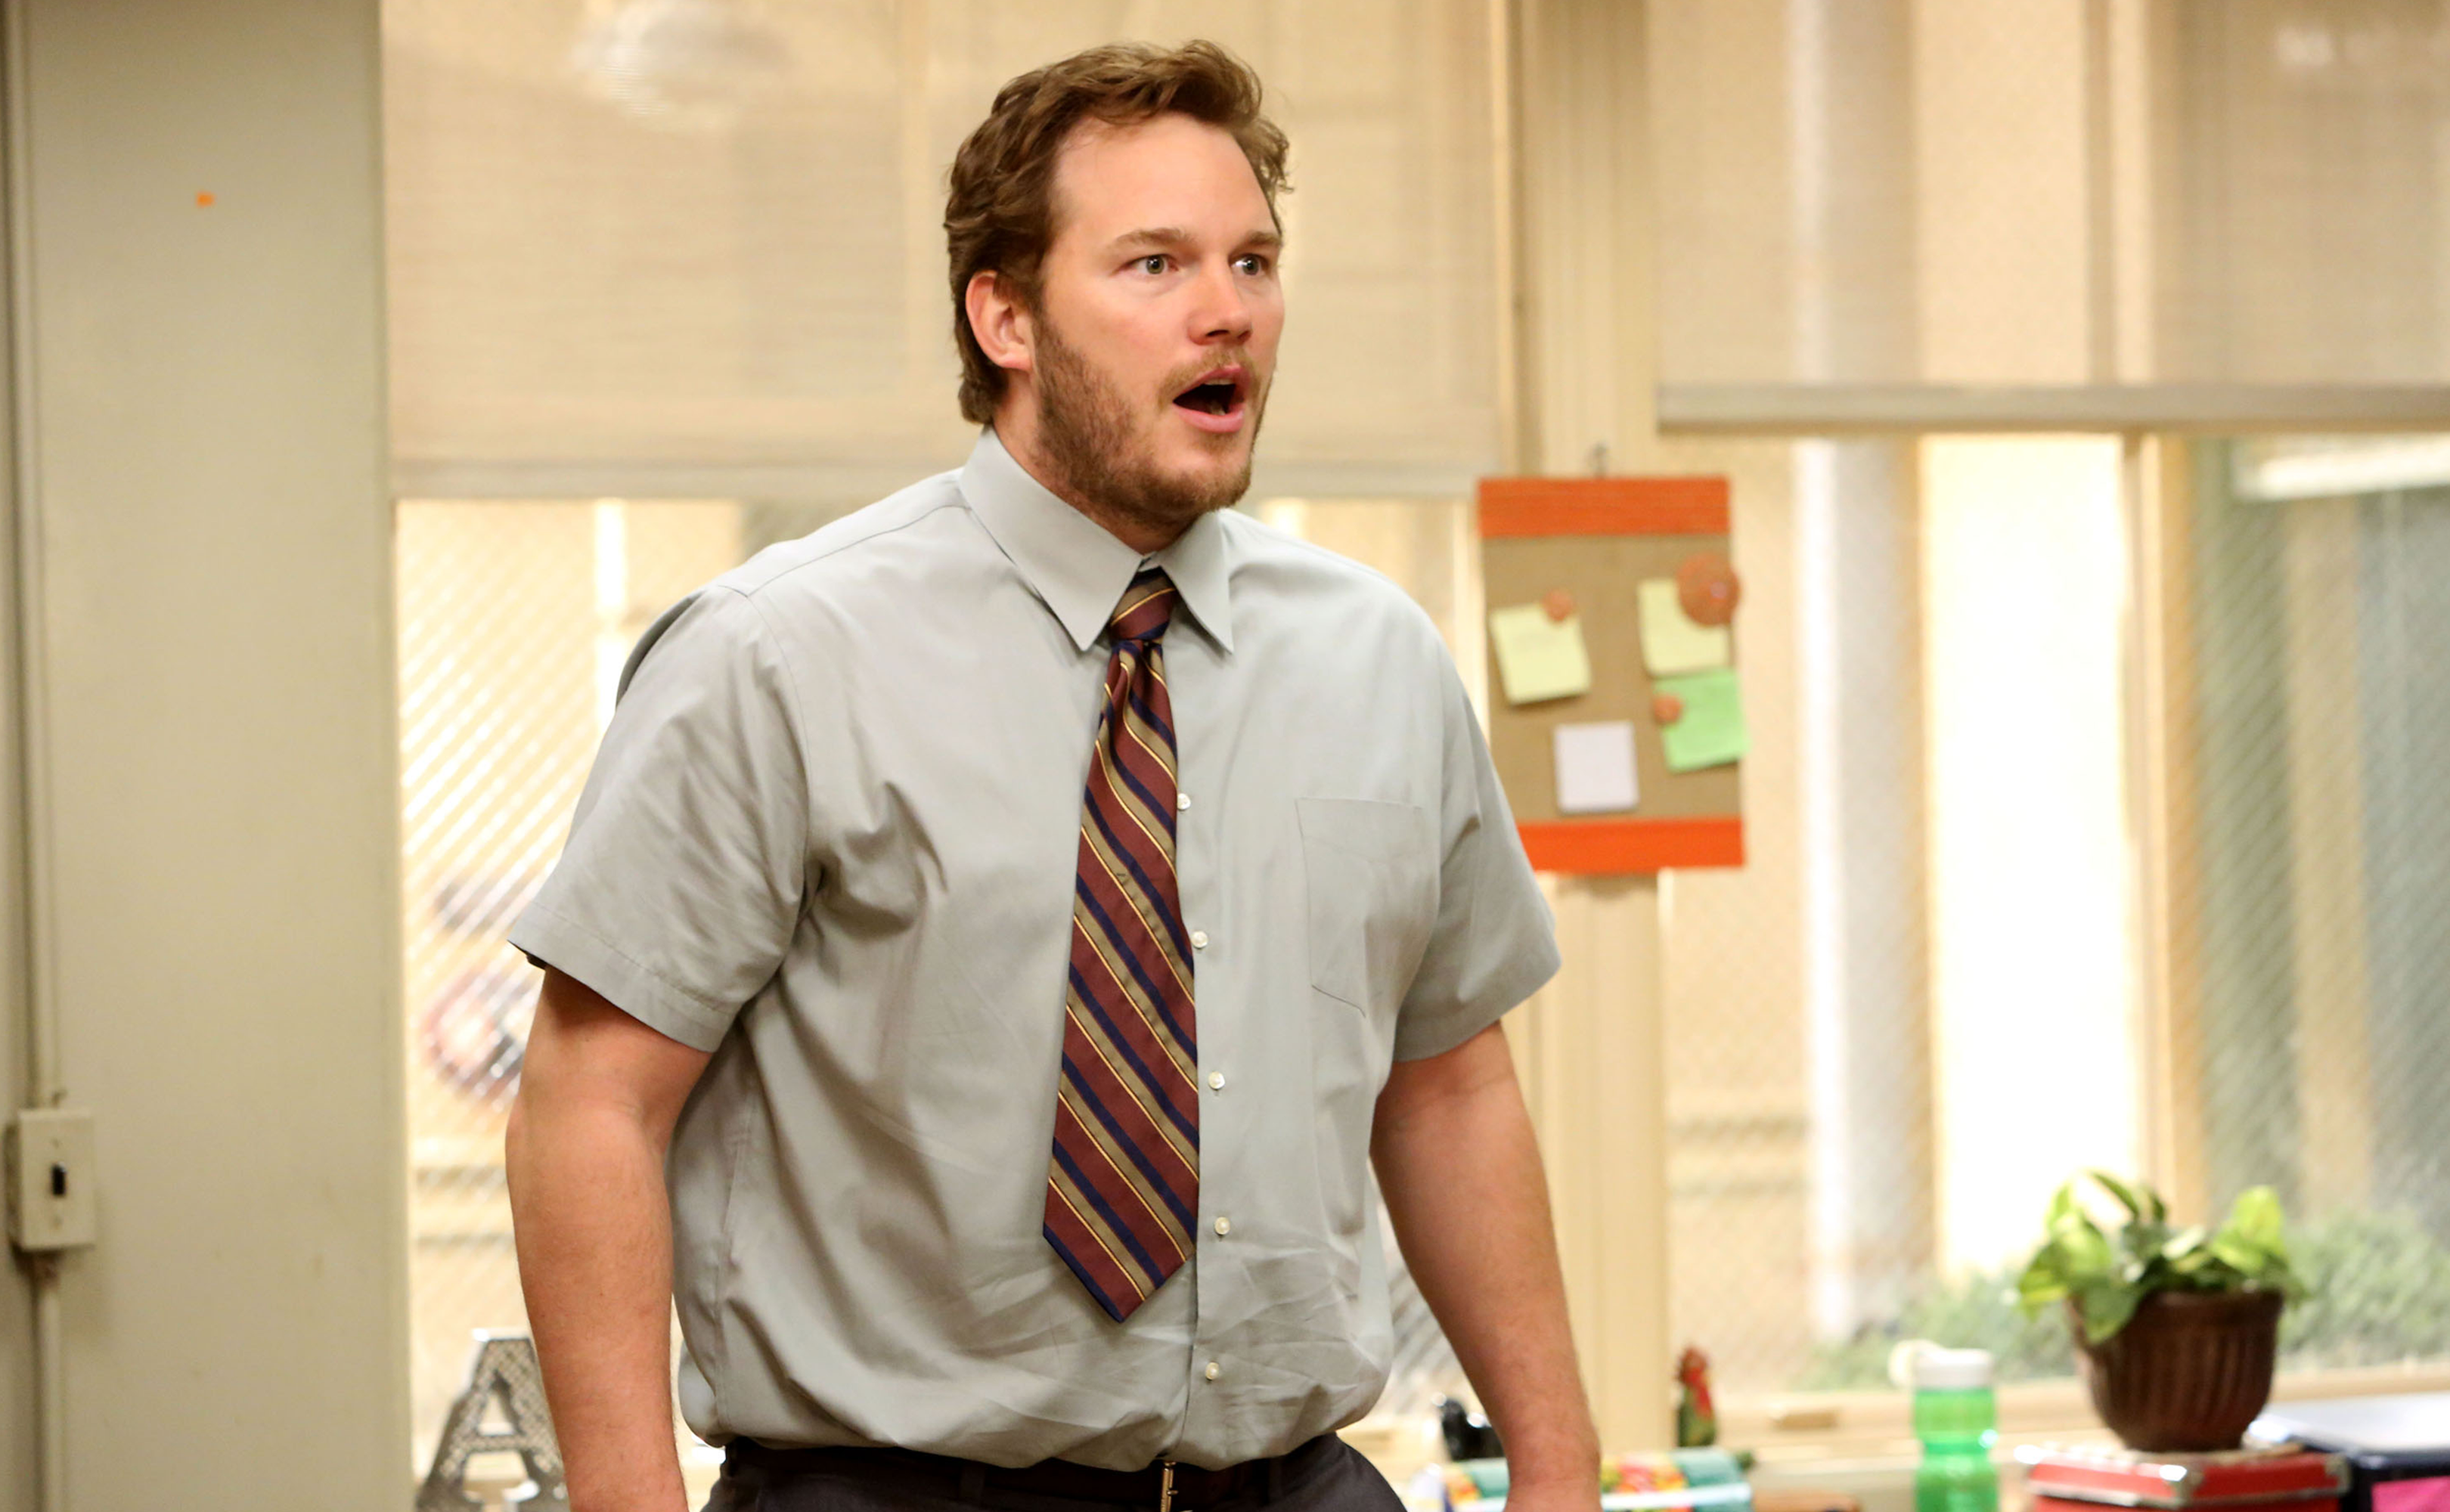 Chris Pratt on His New Movies, Series, and Being the Worst Chris